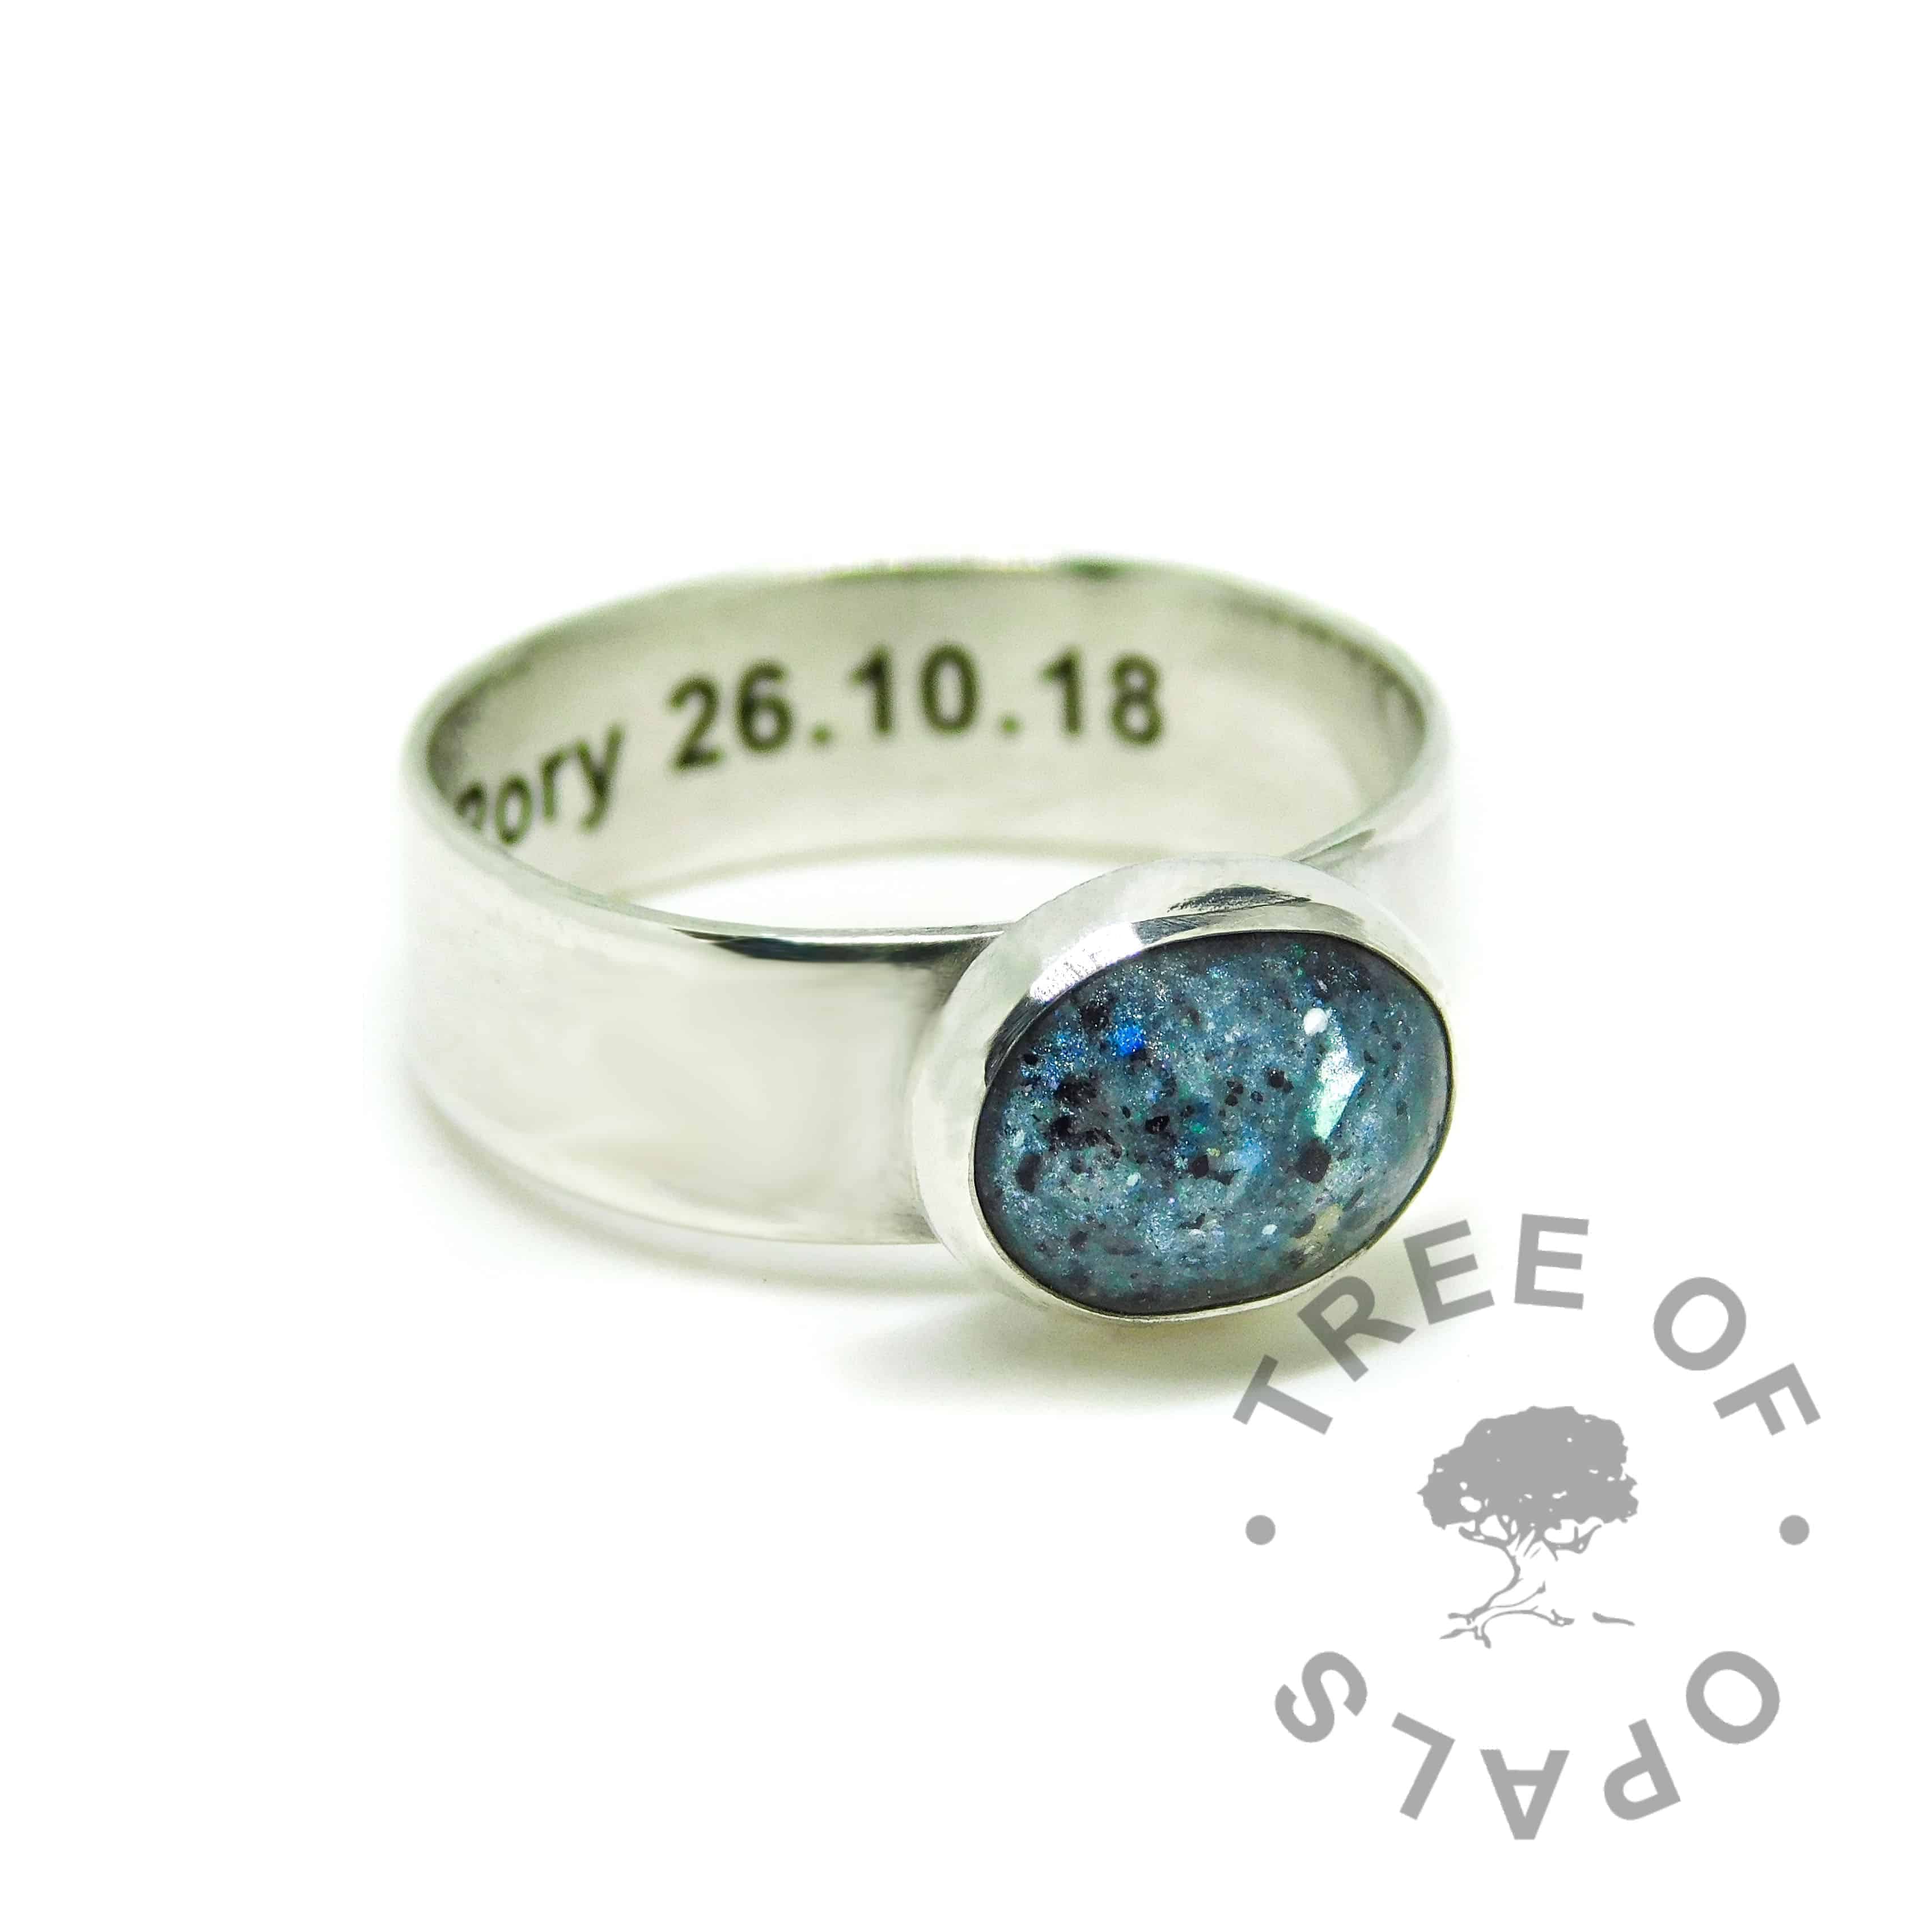 mermaid teal umbilical cord ring on 6mm shiny band. Solid 925 sterling EcoSilver handmade ring with engraved text on the inside of the band, in Arial font. 10x8mm bezel cup rubbed over the cabochon for security.